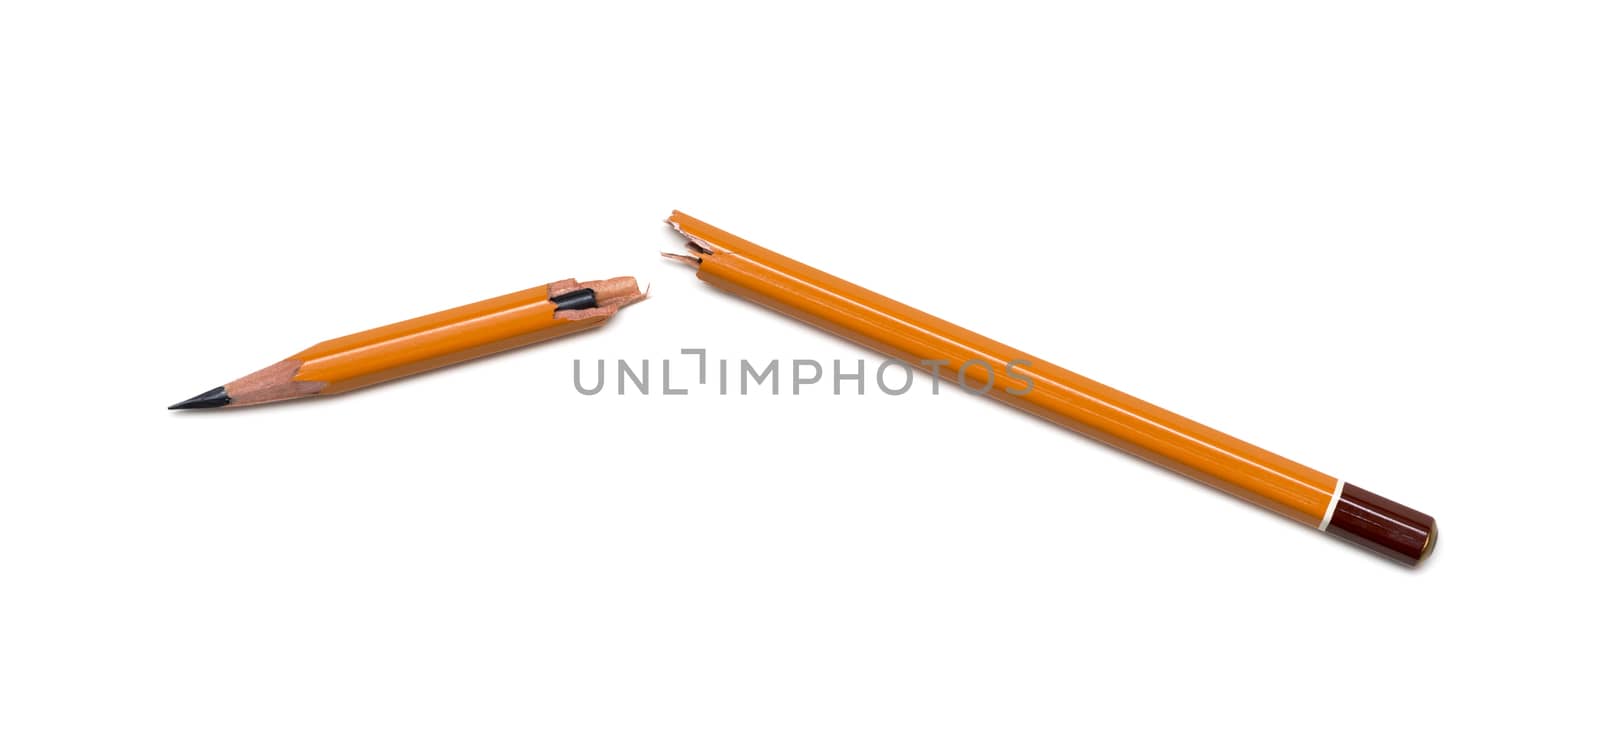 broken pencil on a white background